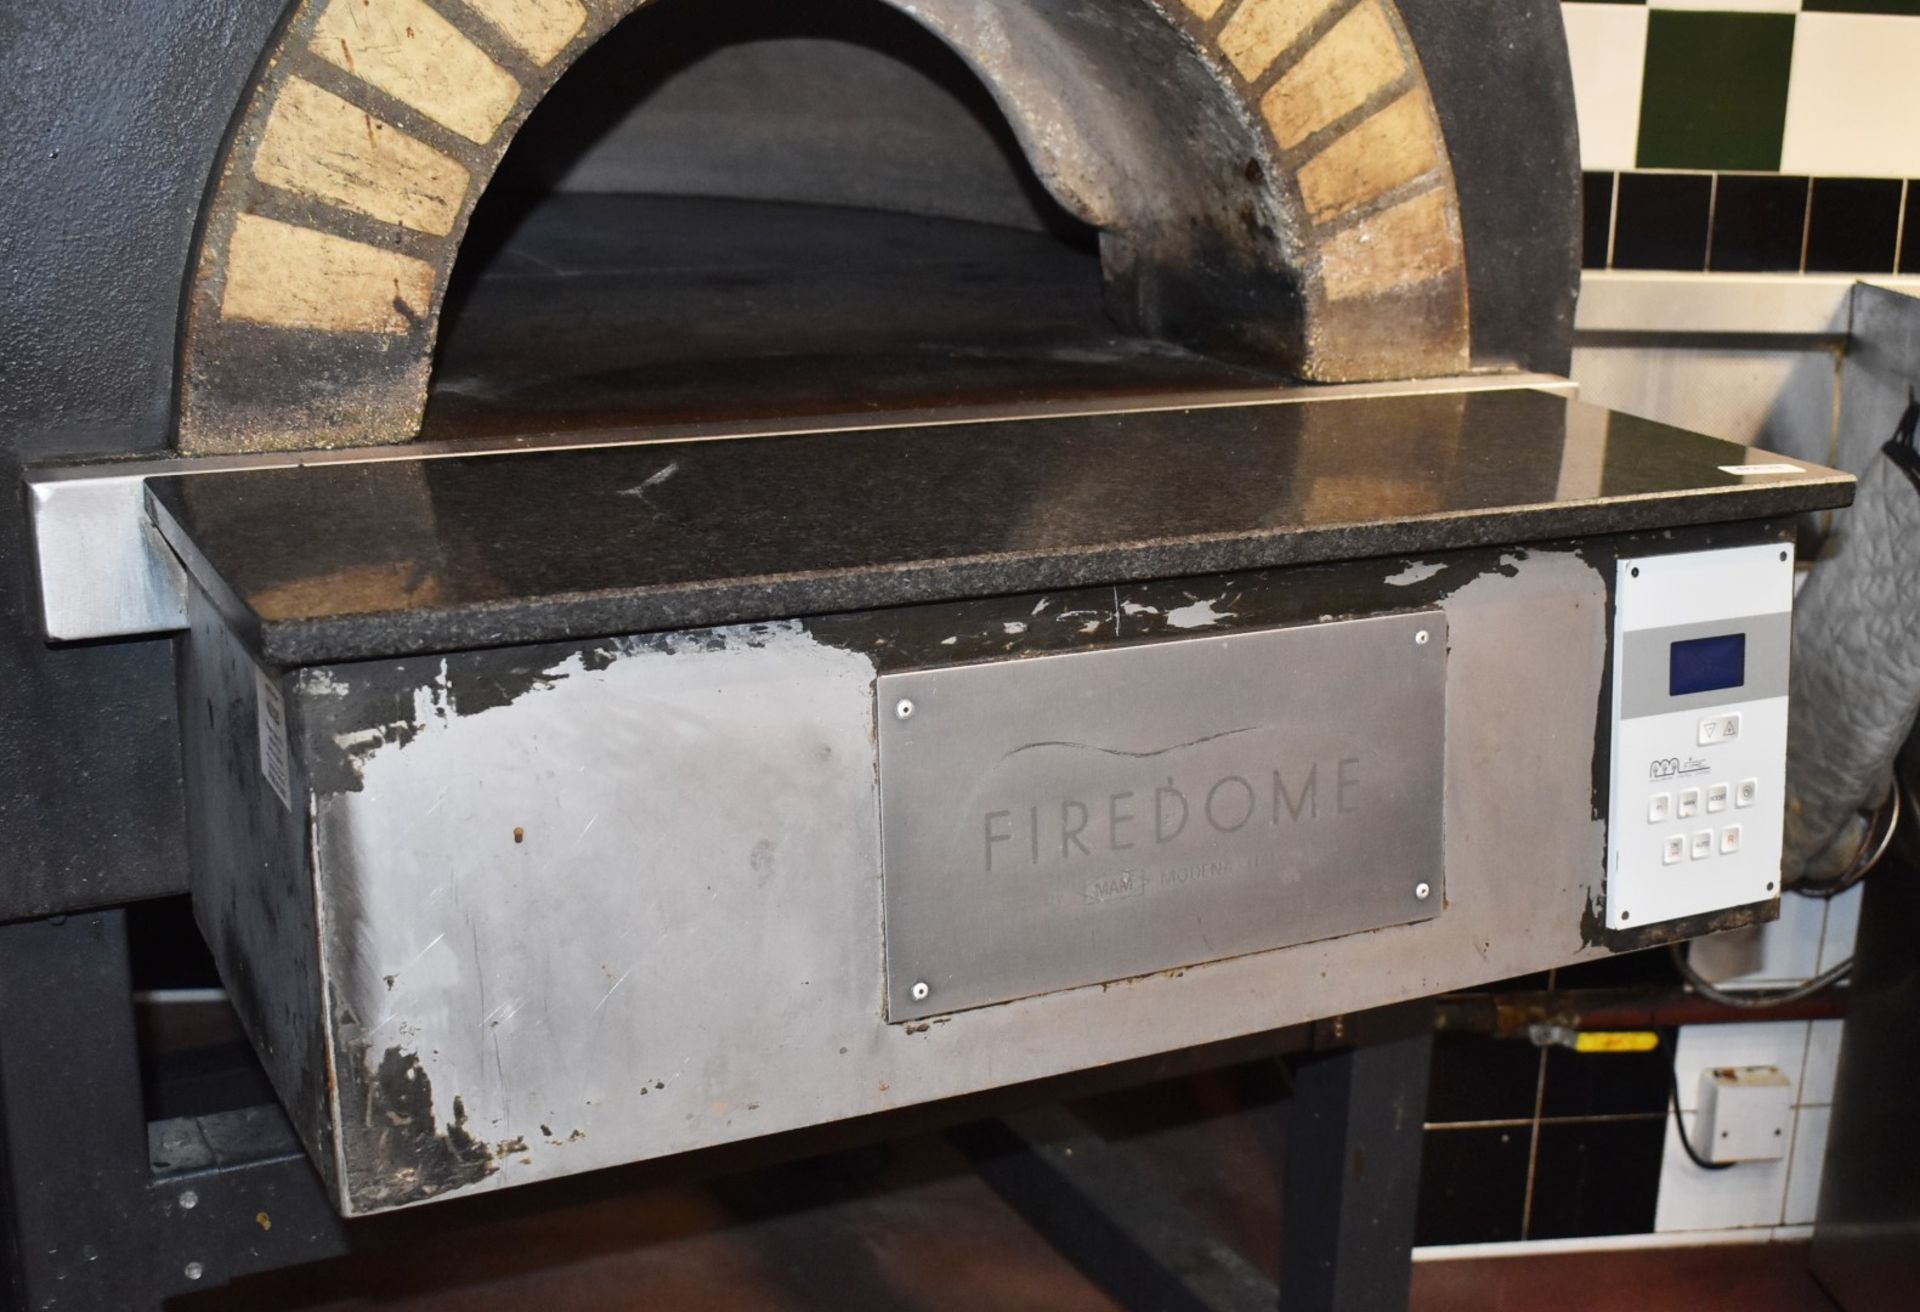 1 x MAM Firedome Commercial Stone Baked Gas Pizza Oven - Made in Italy - Image 4 of 16